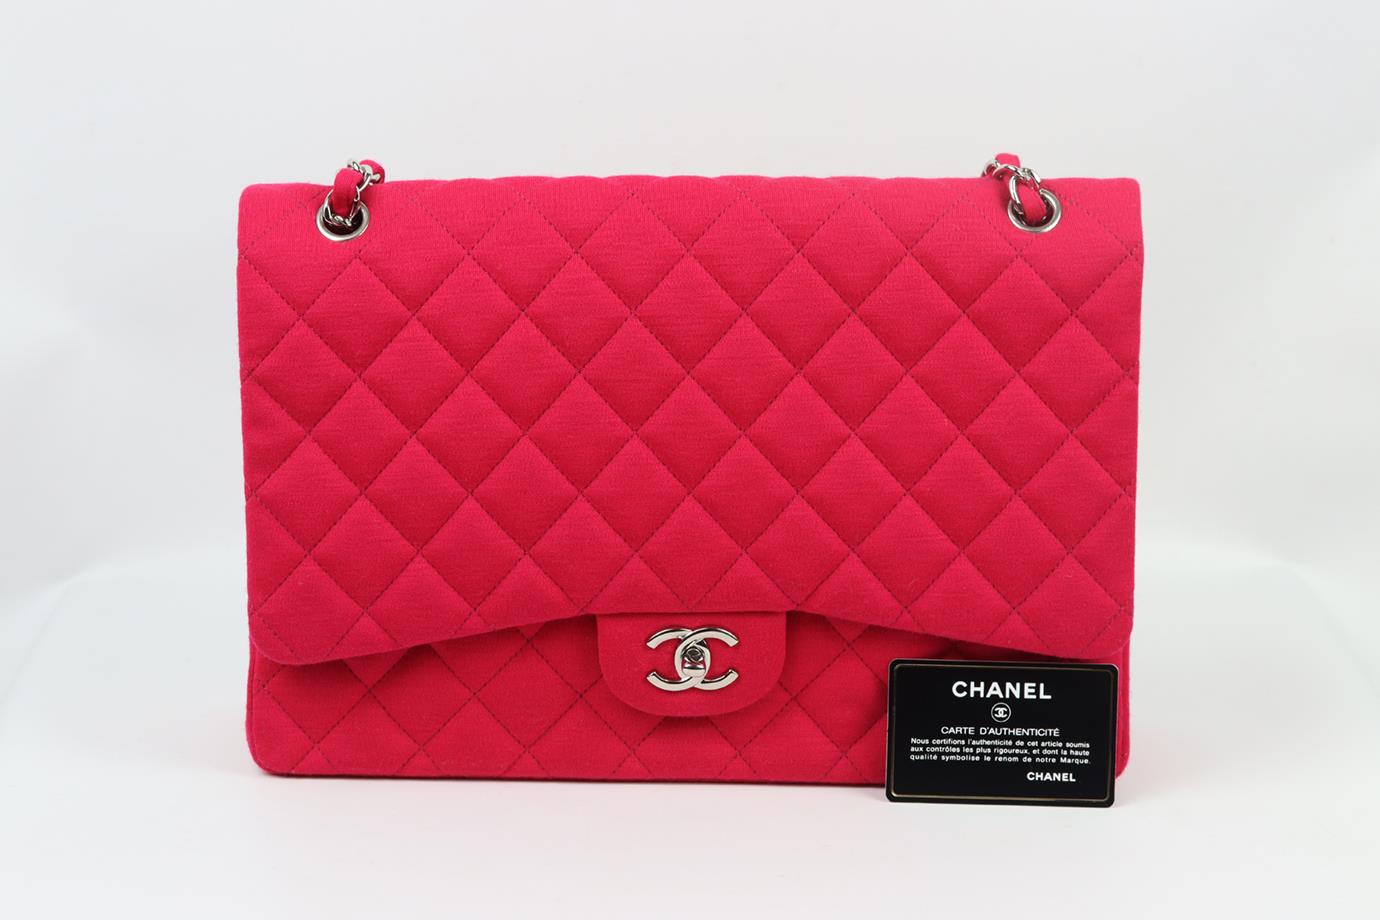 CHANEL 2010 MAXI CLASSIC QUILTED JERSEY SINGLE FLAP SHOULDER BAG